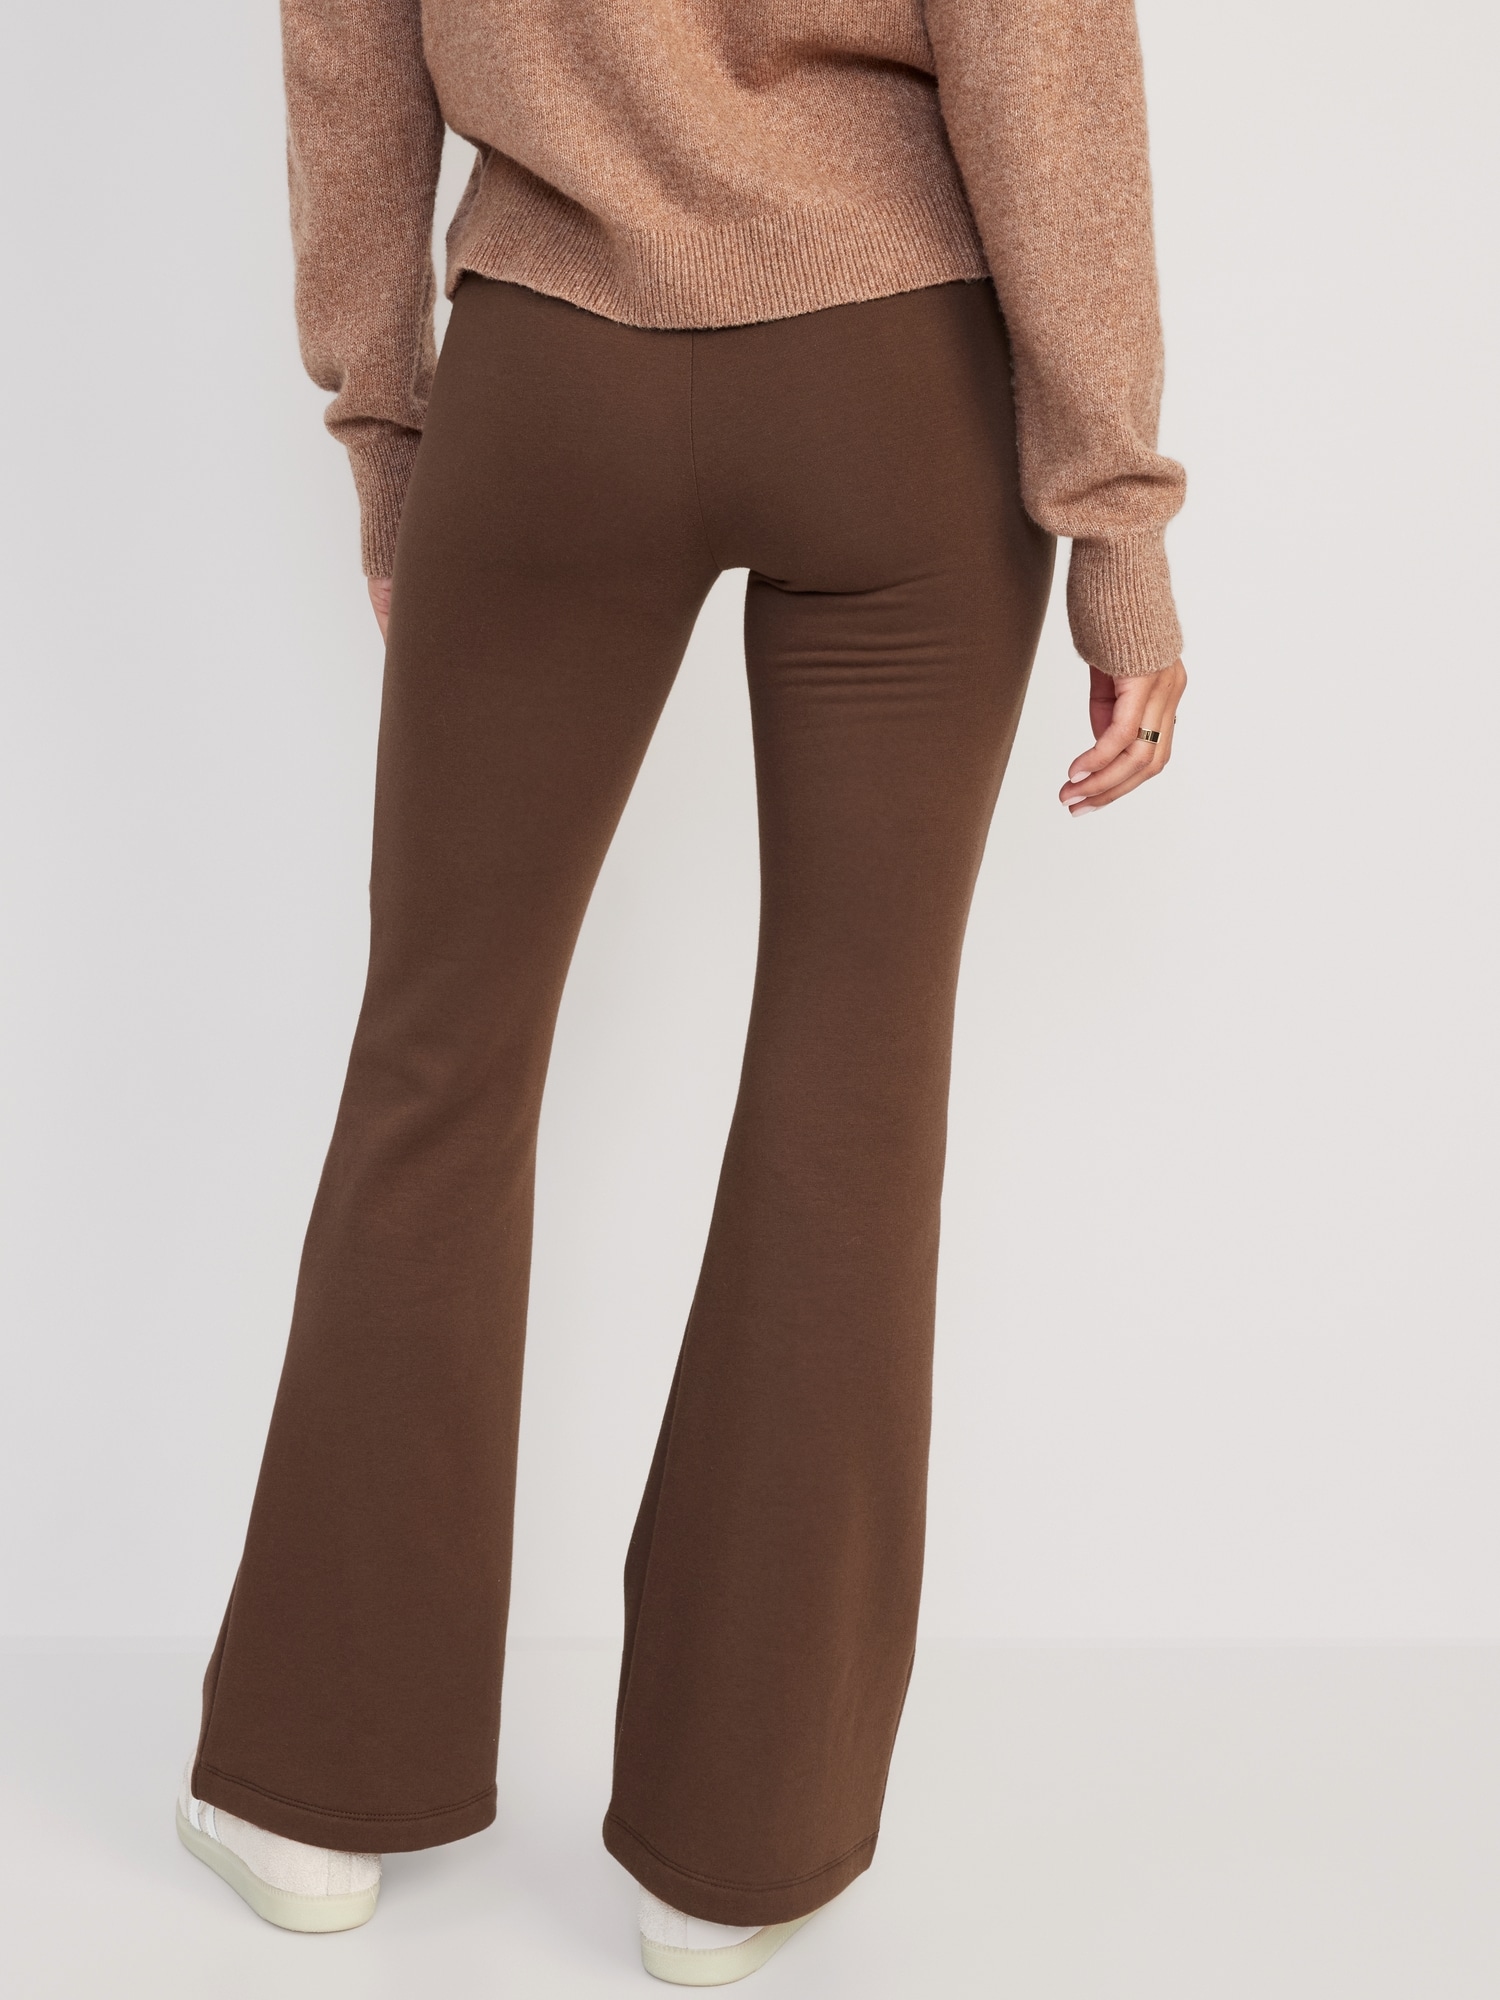 style and glamour Women's Fleece Lined Leggings#(Brown UK 8